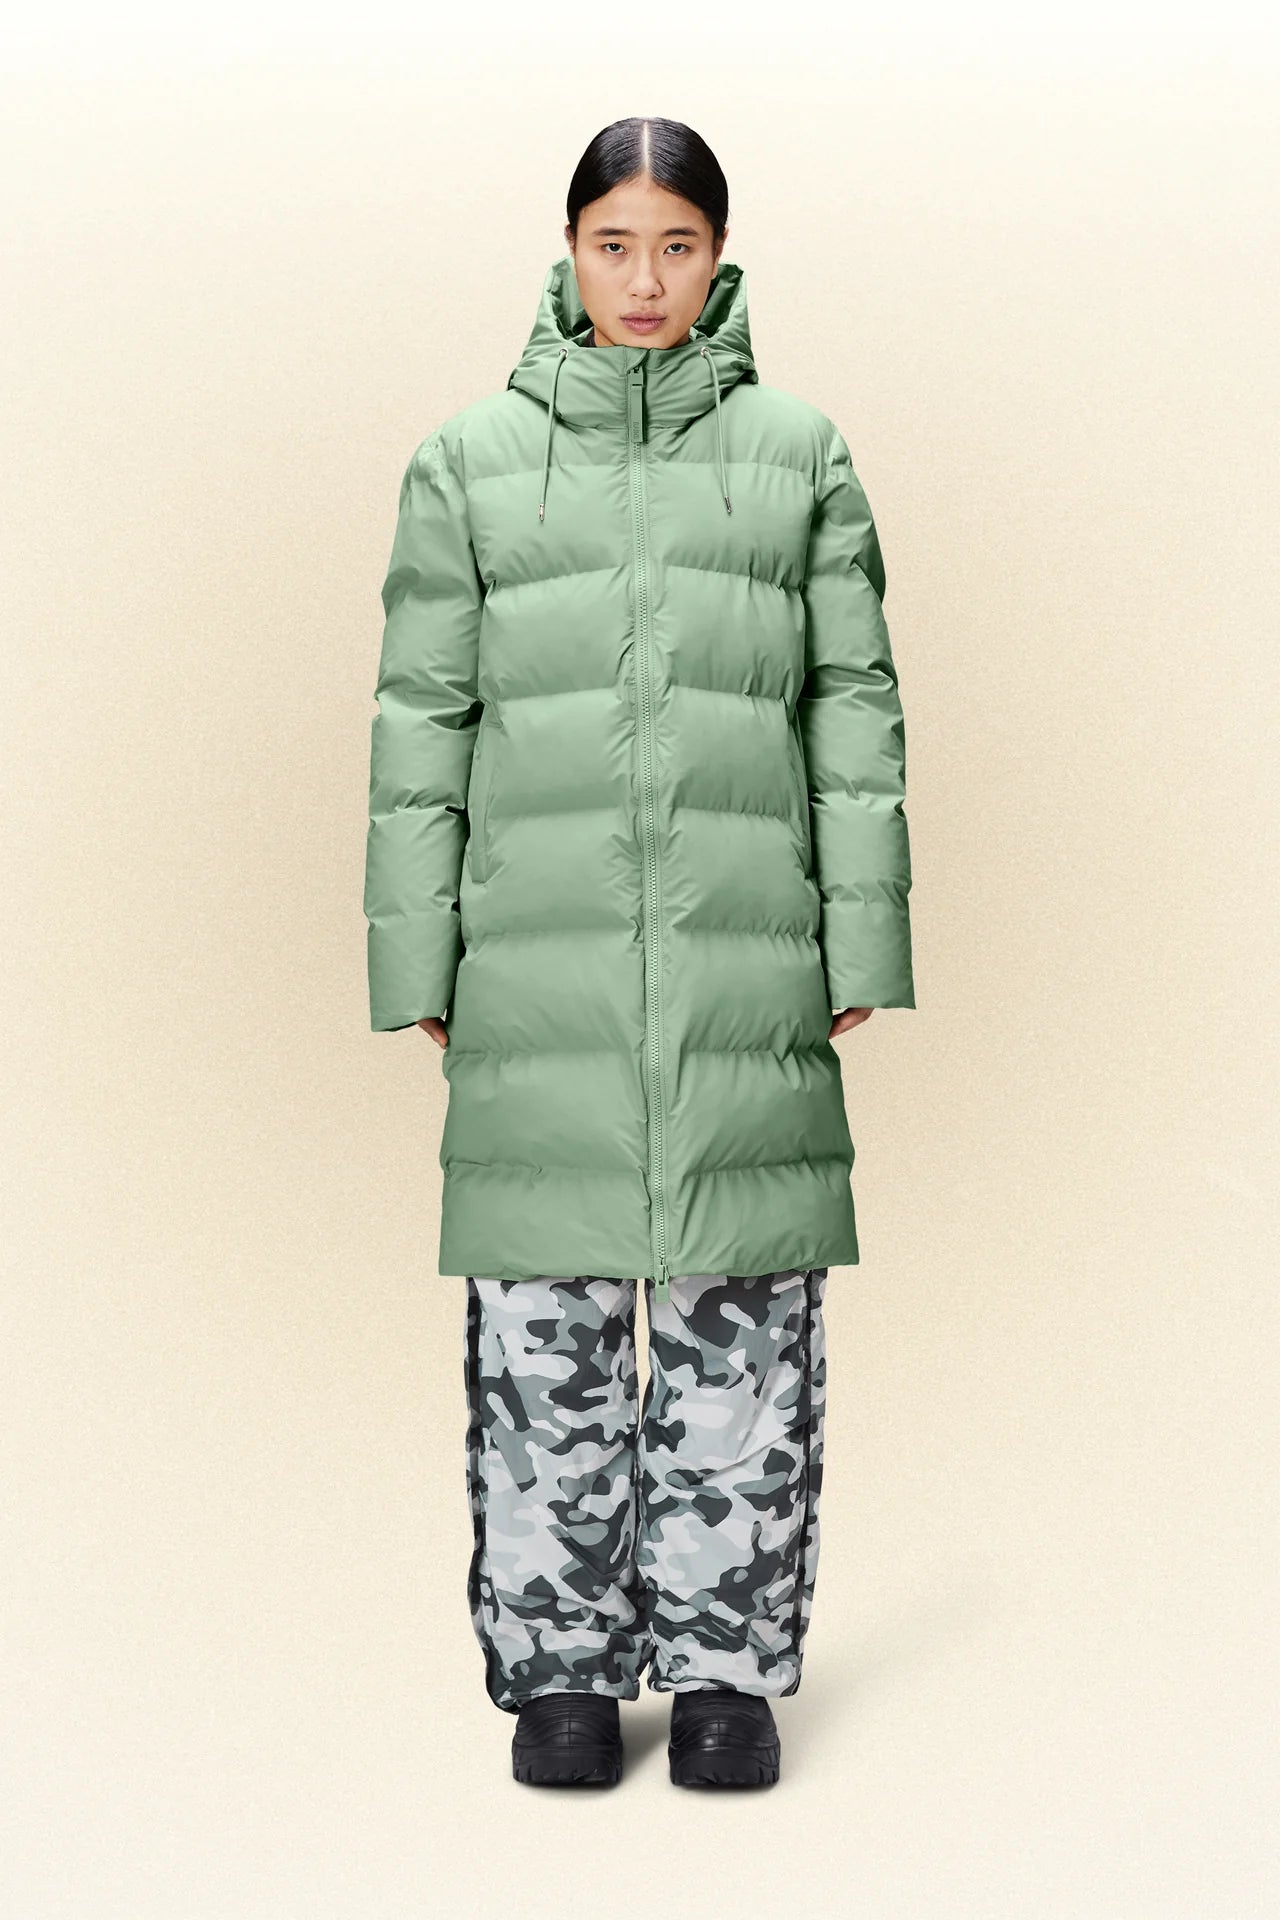 A woman wearing a green Alta Long Puffer Jacket, a waterproof and winter jacket by Rains, paired with camouflage pants.